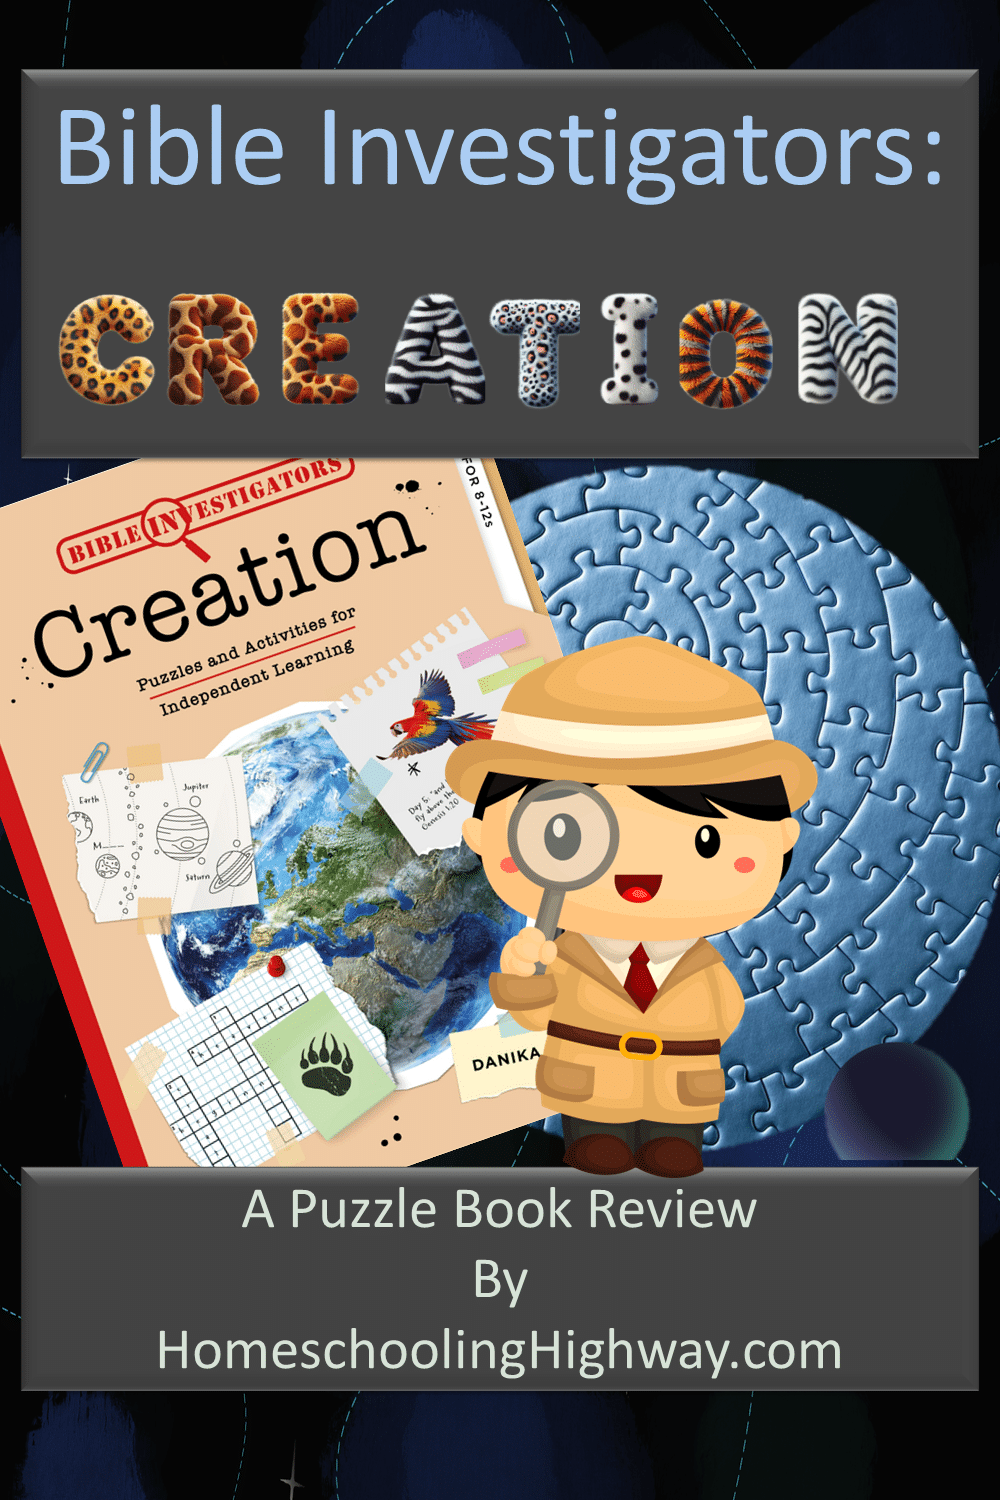 Bible Investigators Creation written by Danika Cooley. Book Reviewed by HomeschoolingHighway.com